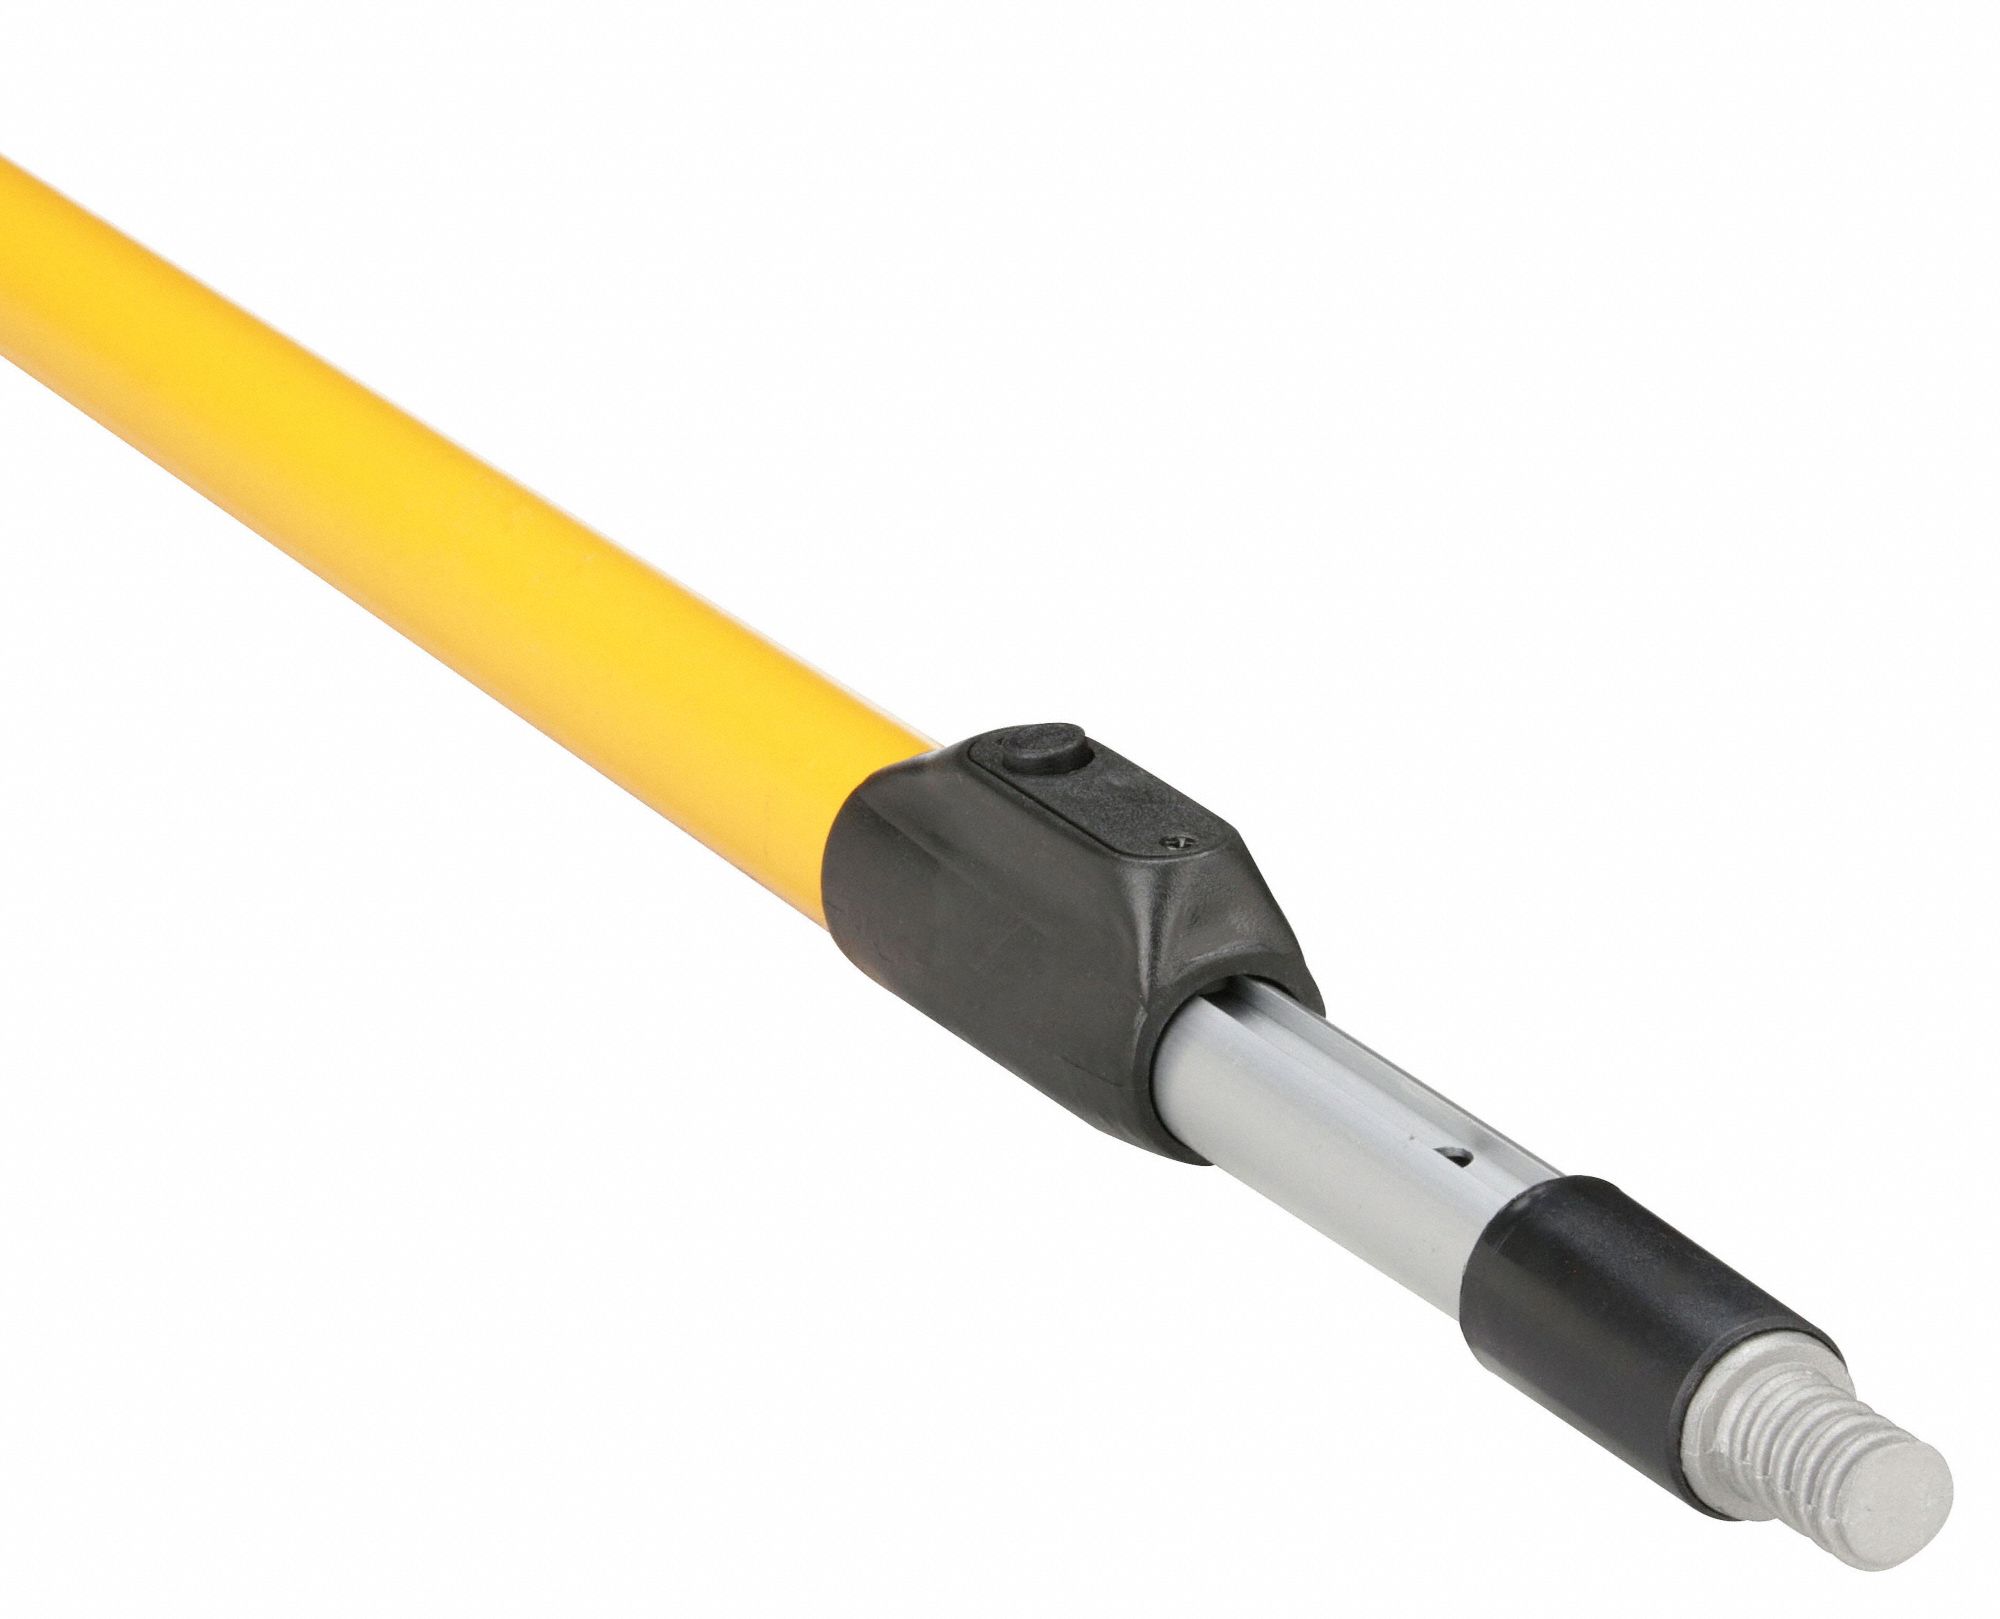 APPROVED VENDOR HEAVY DUTY EXTENSION POLE 8 TO 16 F - Paint Roller